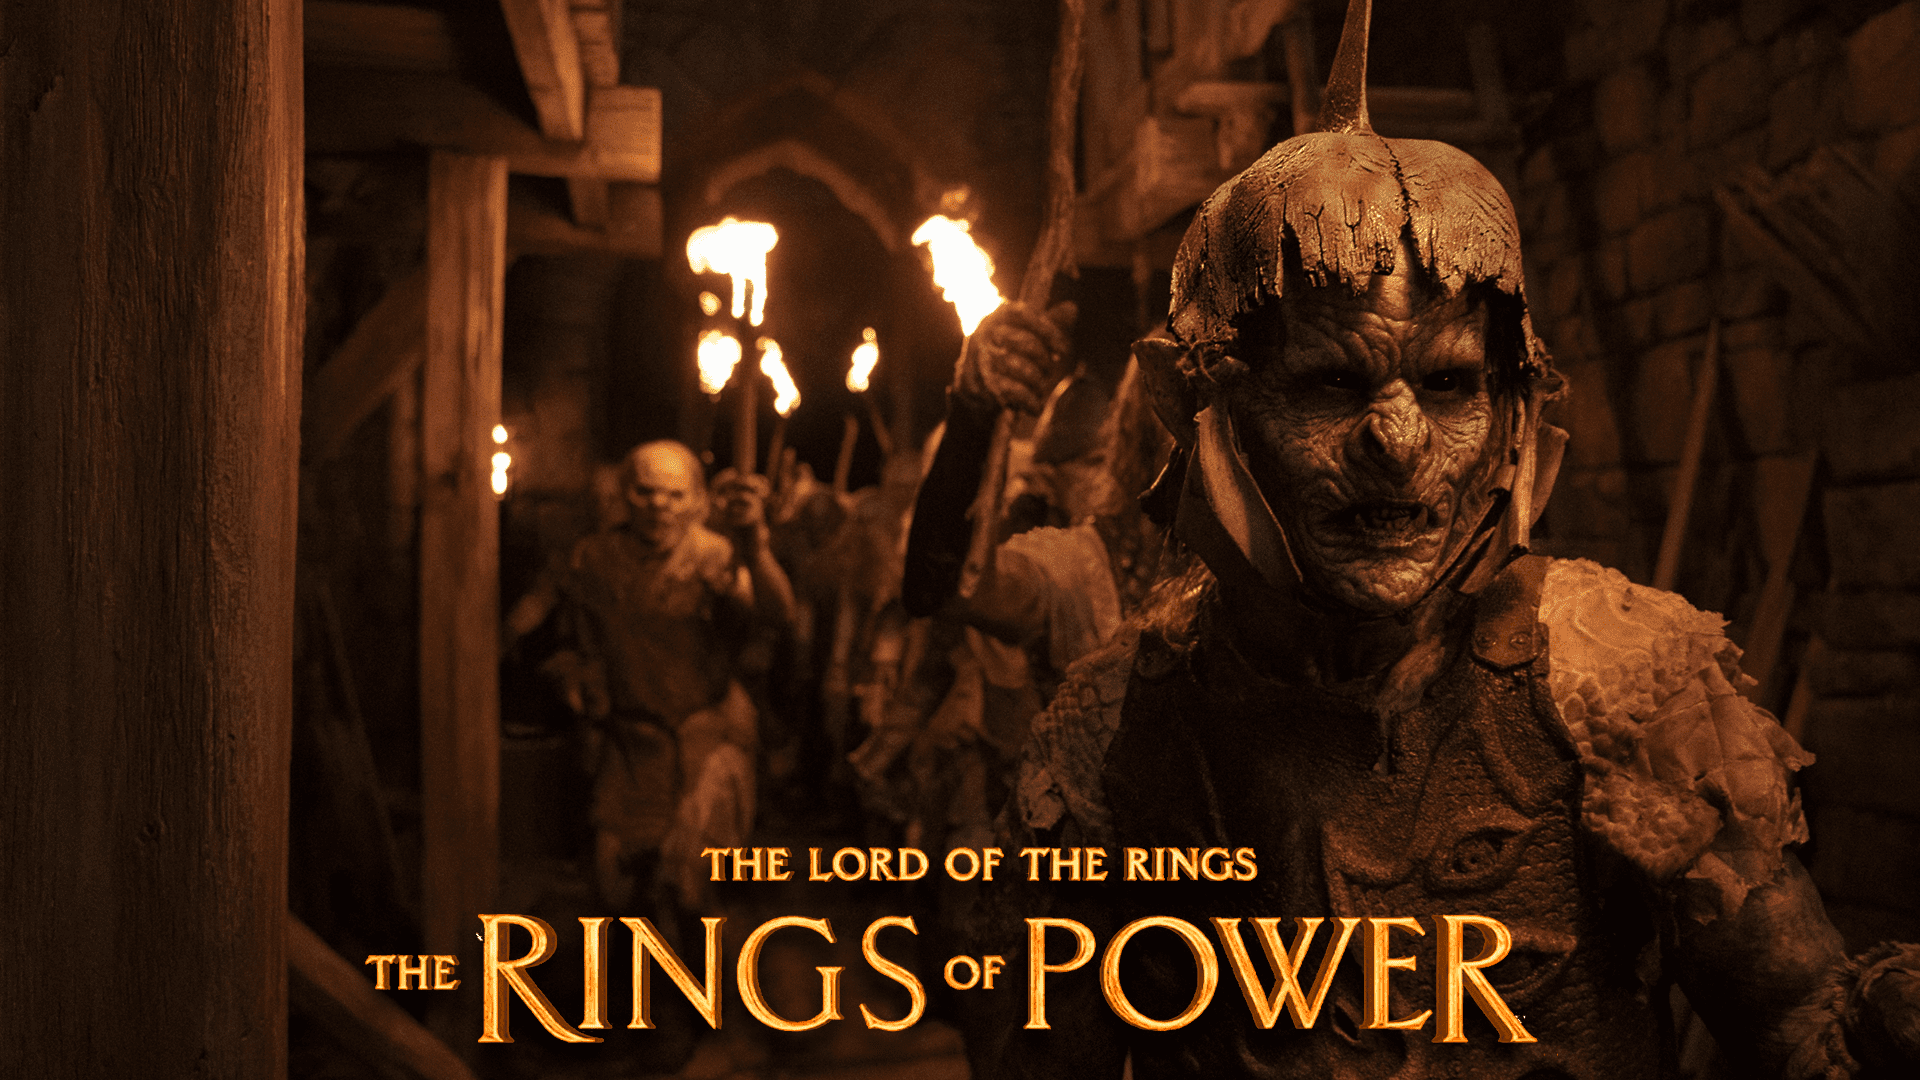 The Rings of Power Episode 3